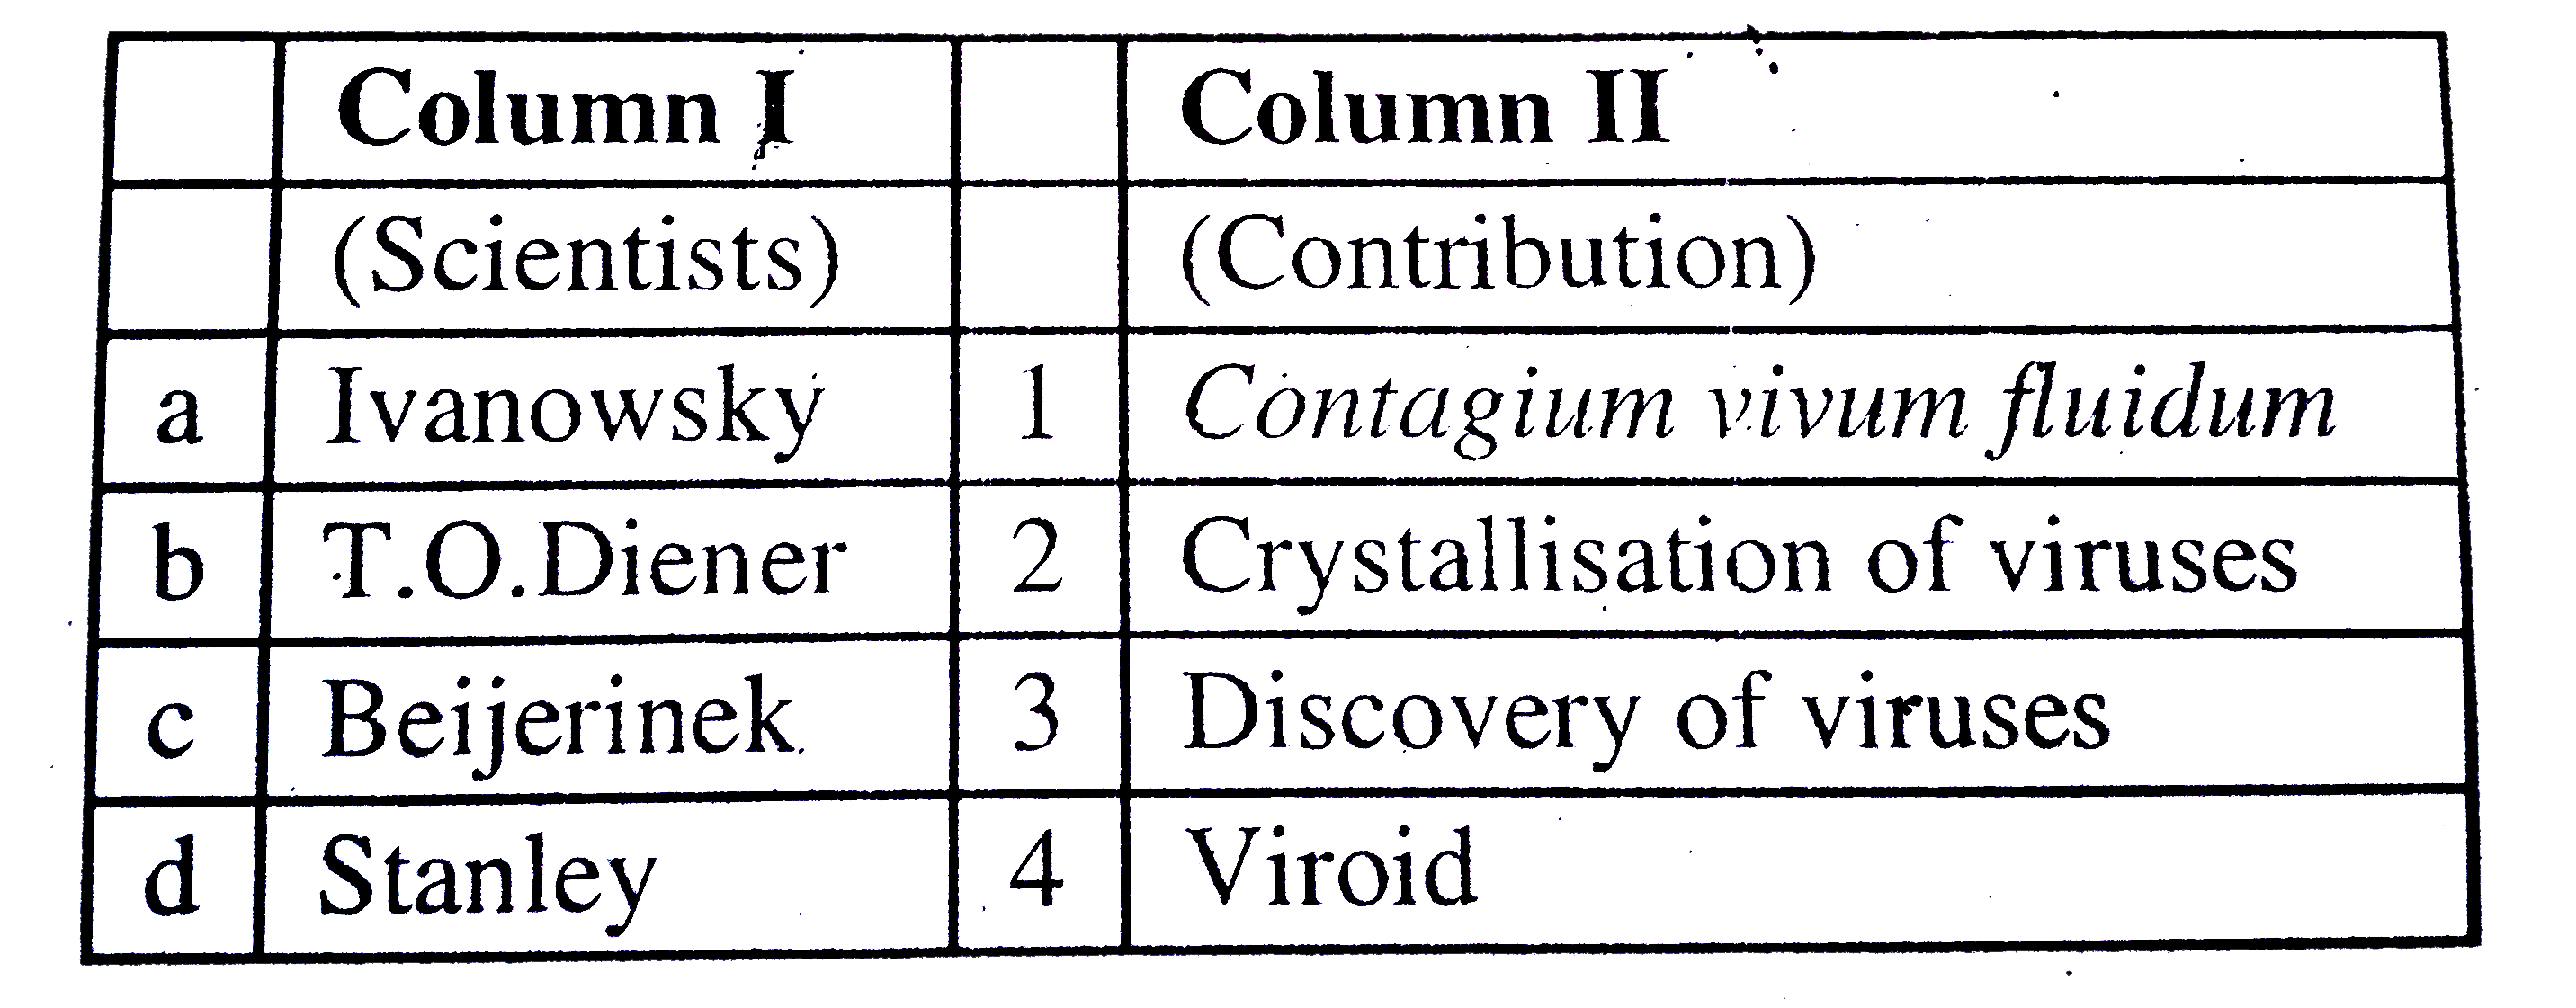 Match the columns I and II, and choose the correct combination from the options given :-